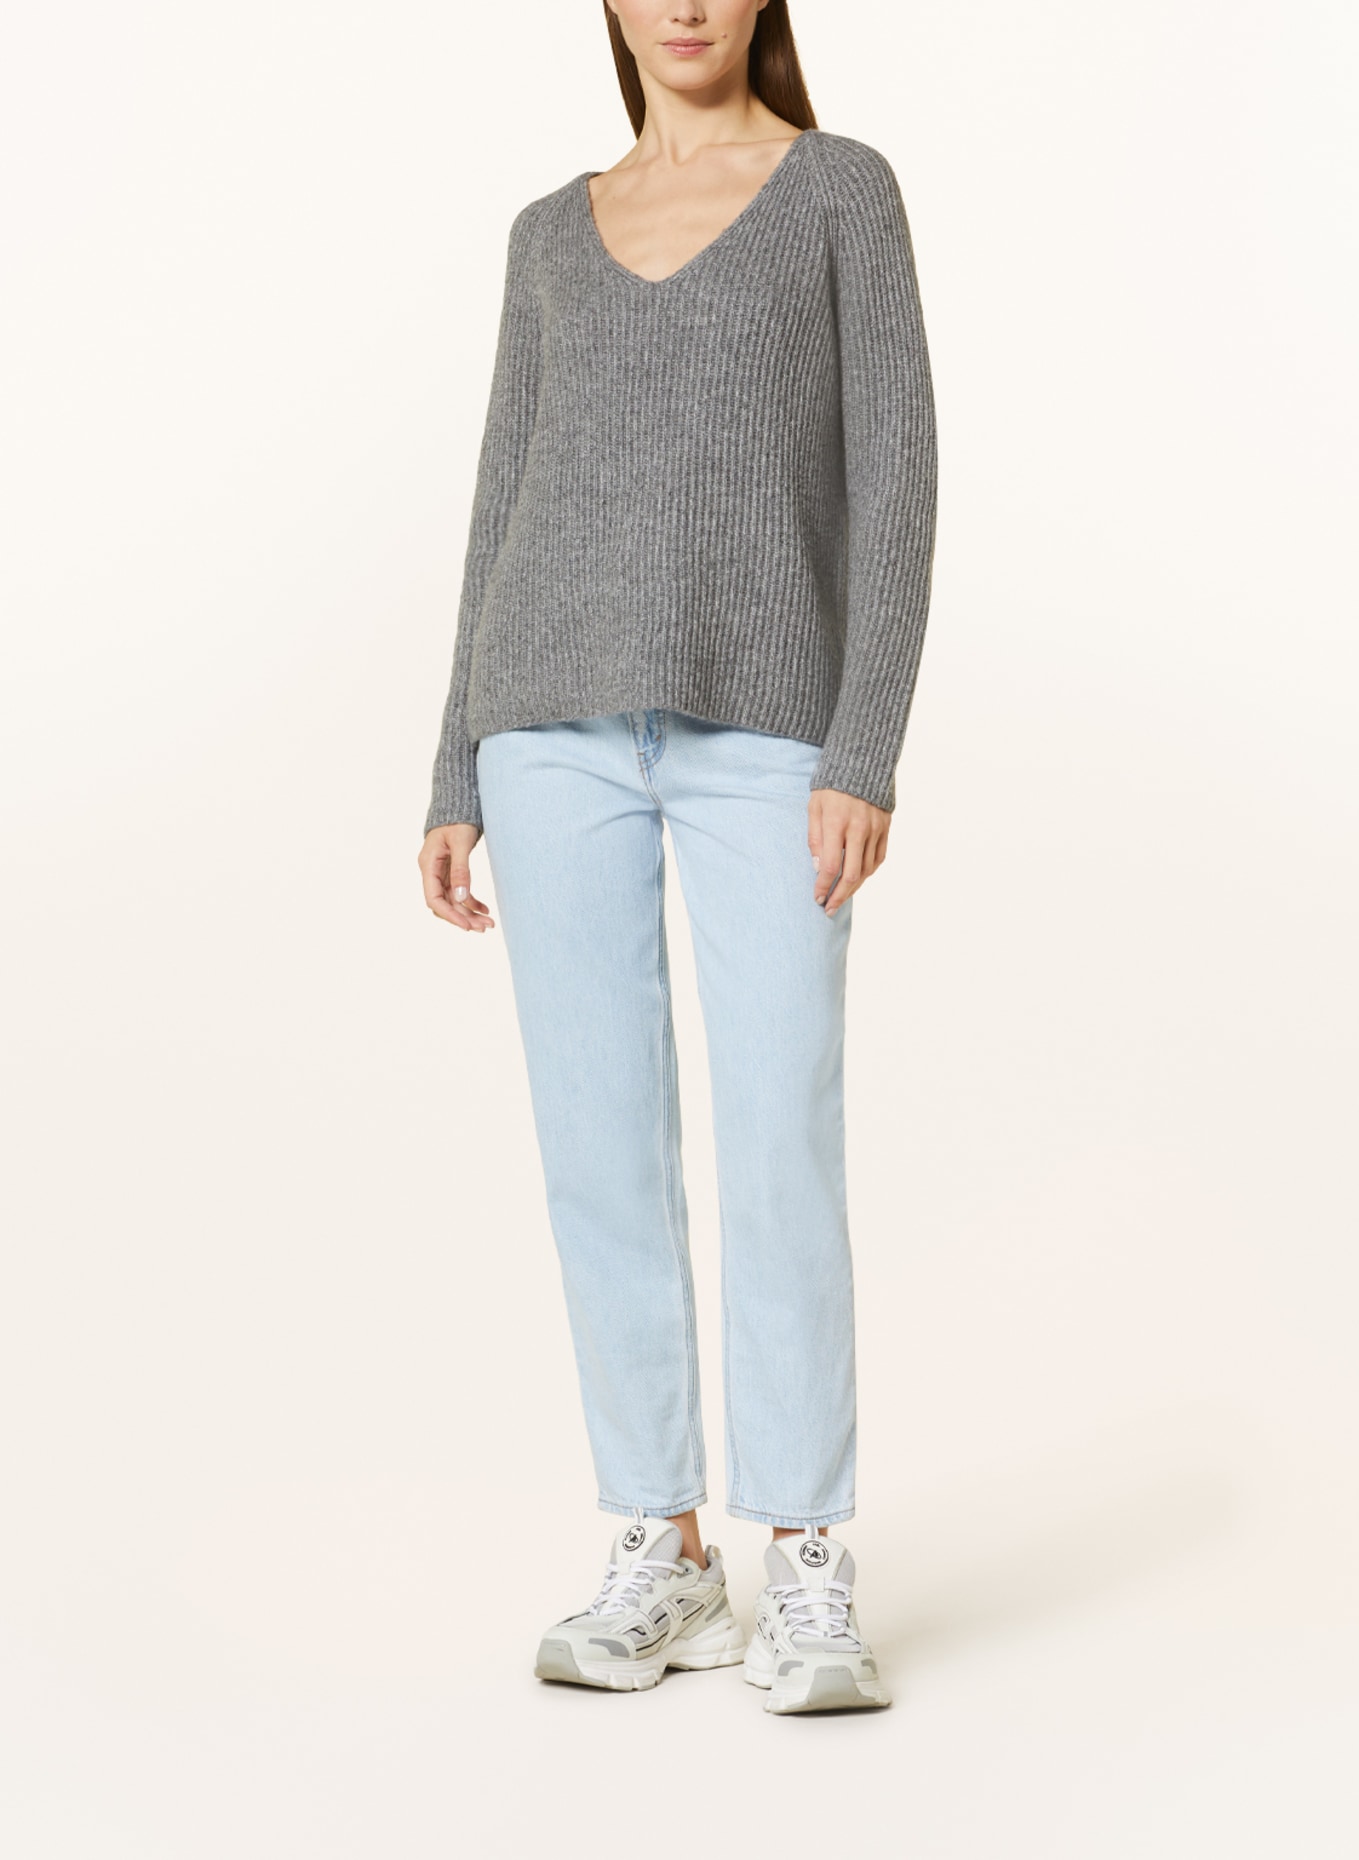 FYNCH-HATTON Sweater, Color: LIGHT GRAY (Image 2)